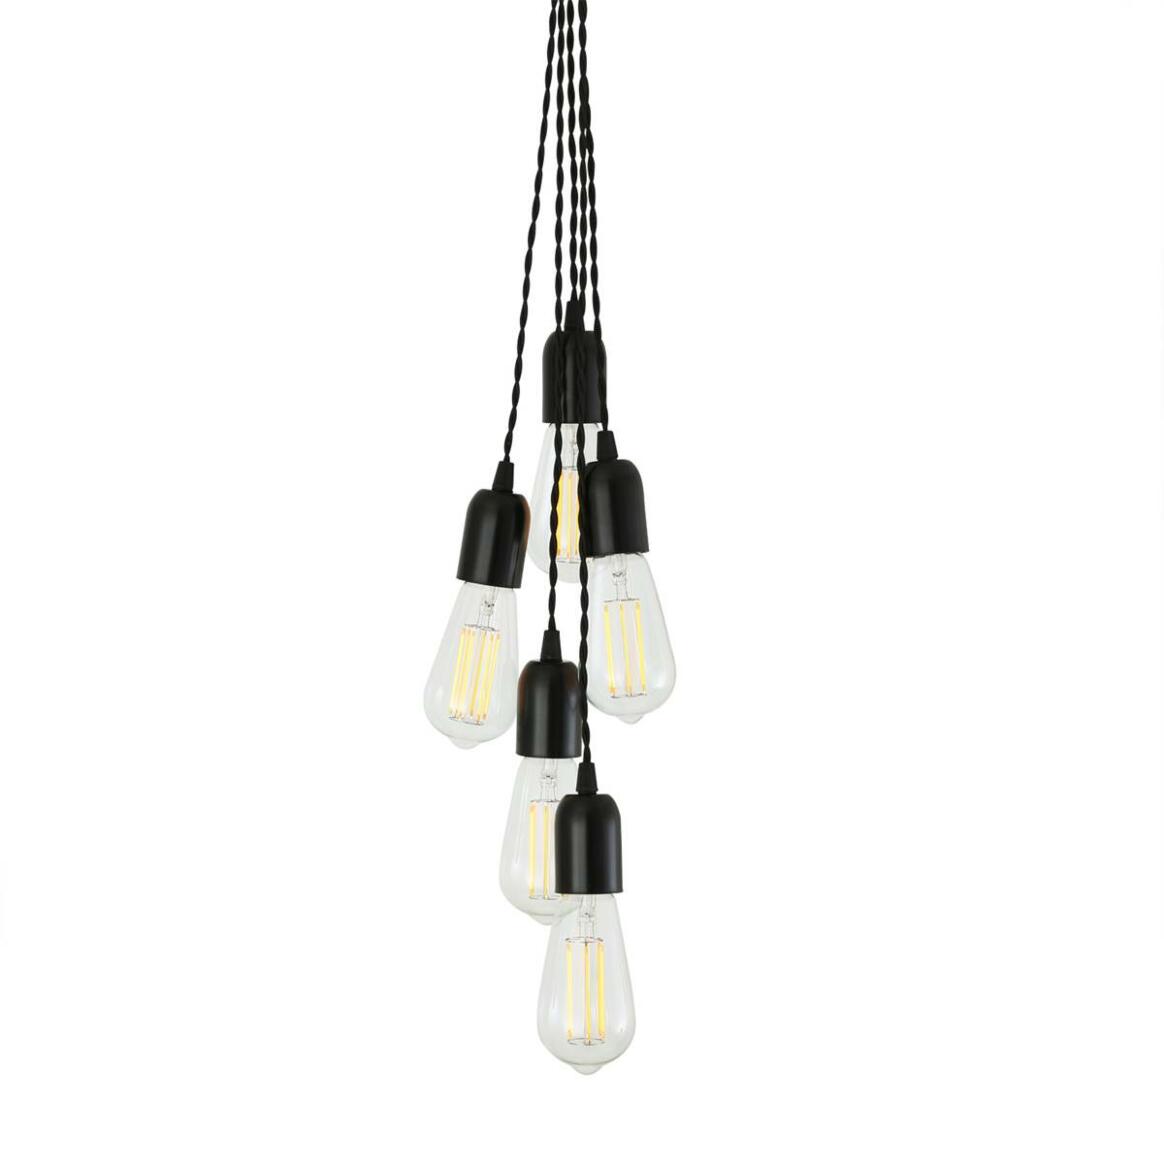 Aneho Contemporary Pendant Cluster, Five Light main product image